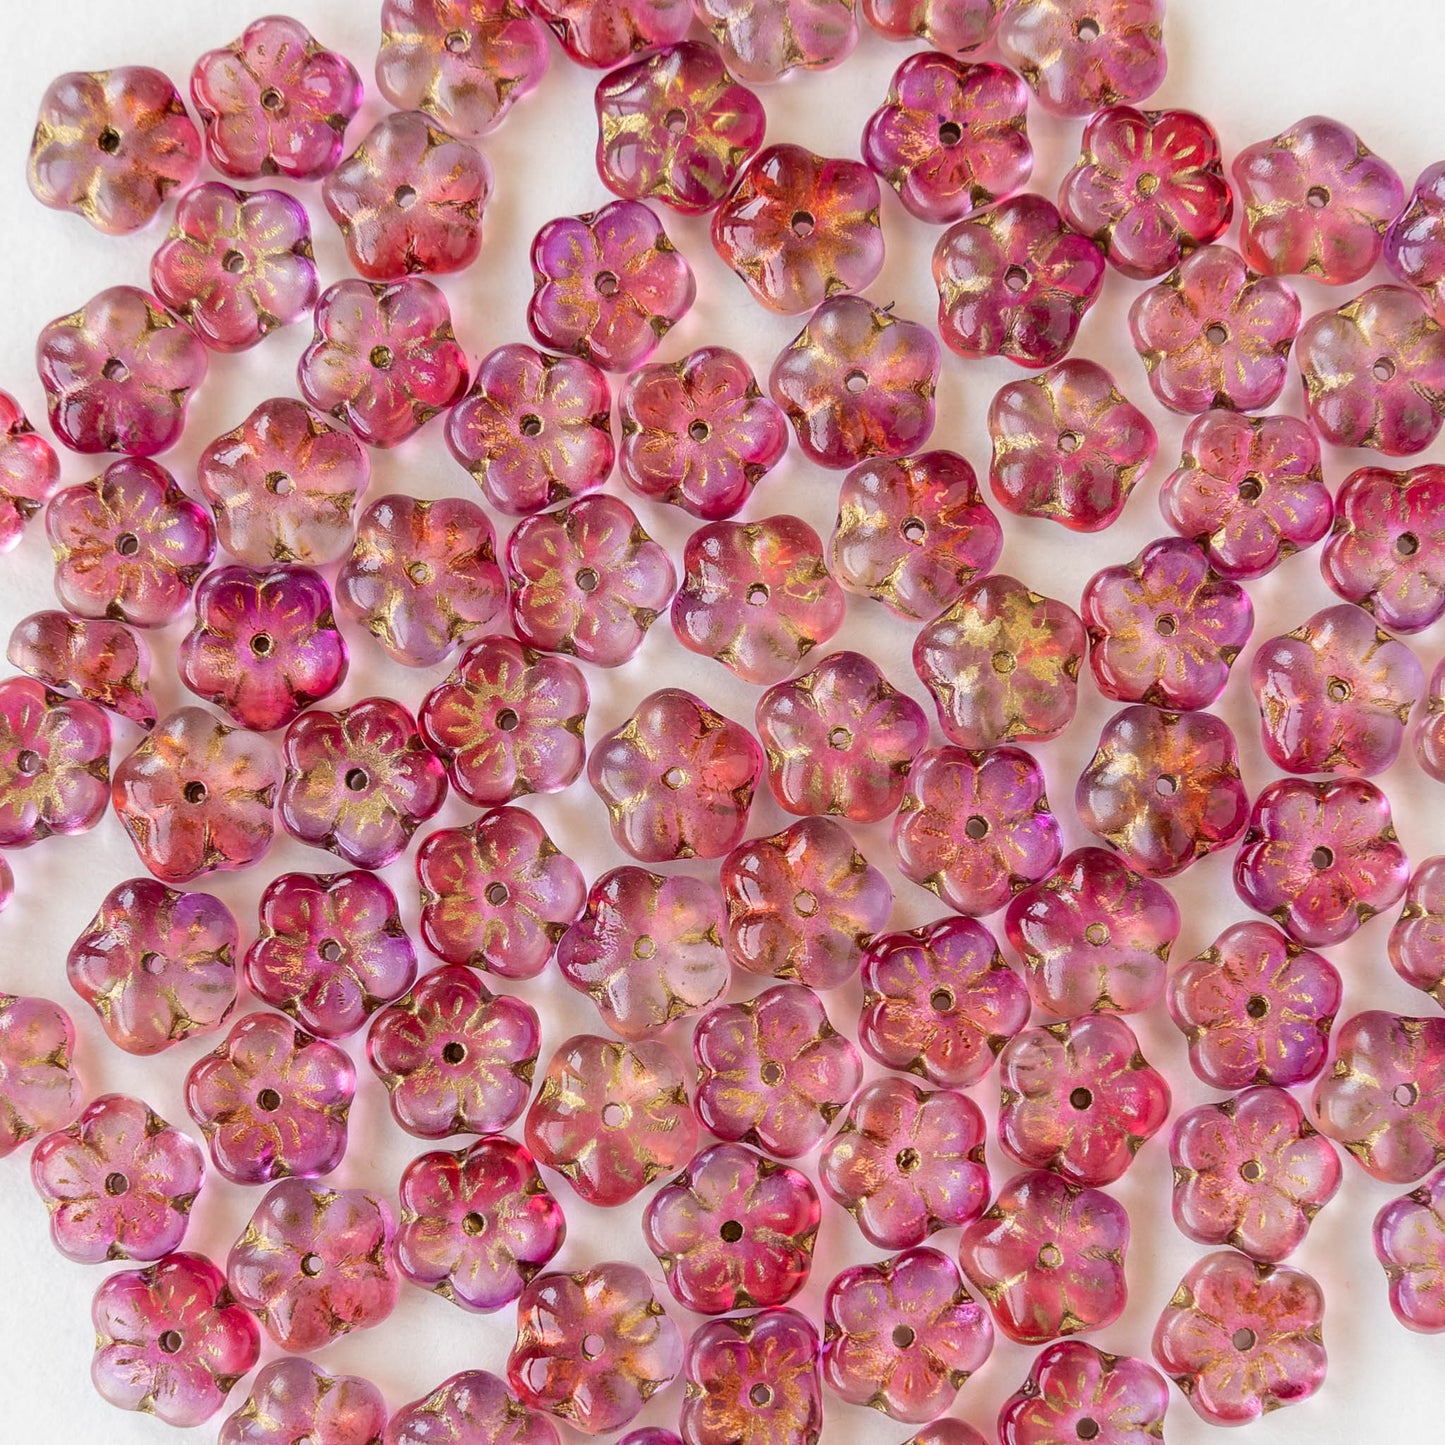 8mm Glass Flower Beads - Pink Mix with Gold Wash - 30 beads